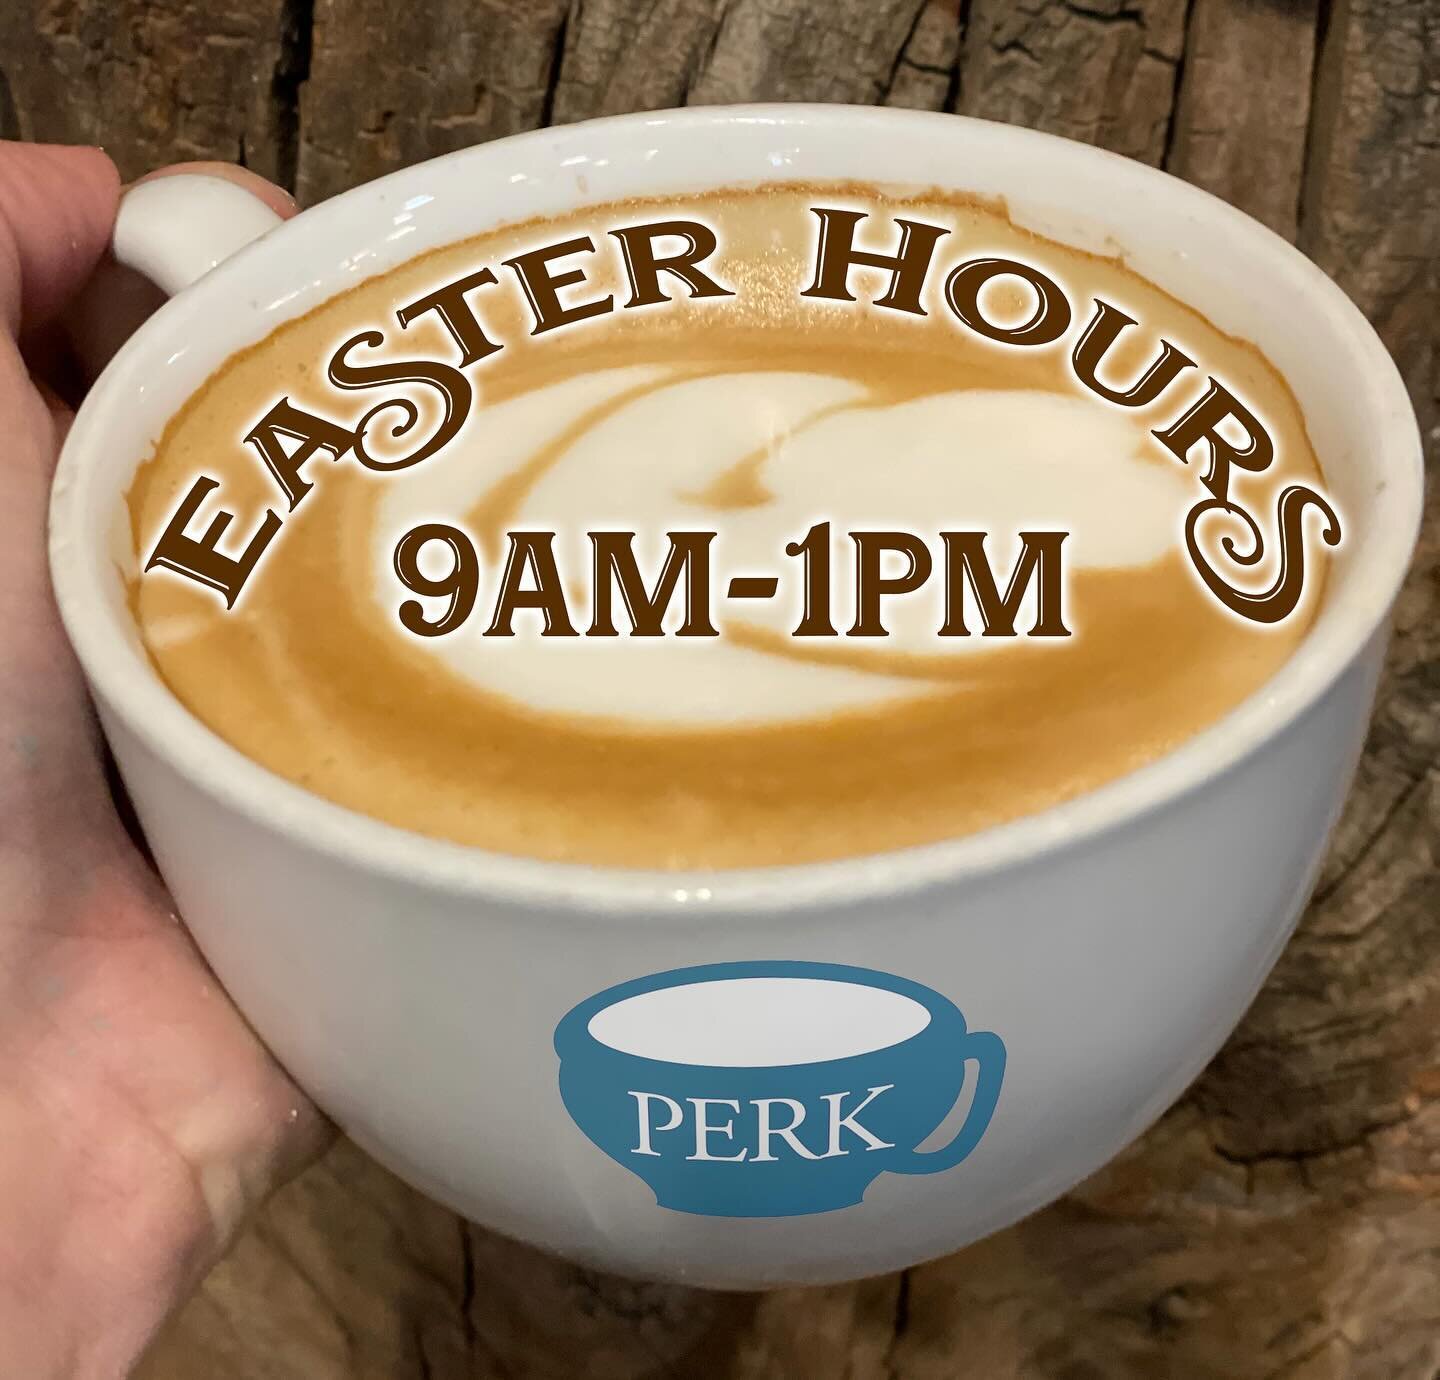 🐰☕️ PERK will be open from 9am-1pm on Easter Sunday 🐰☕️